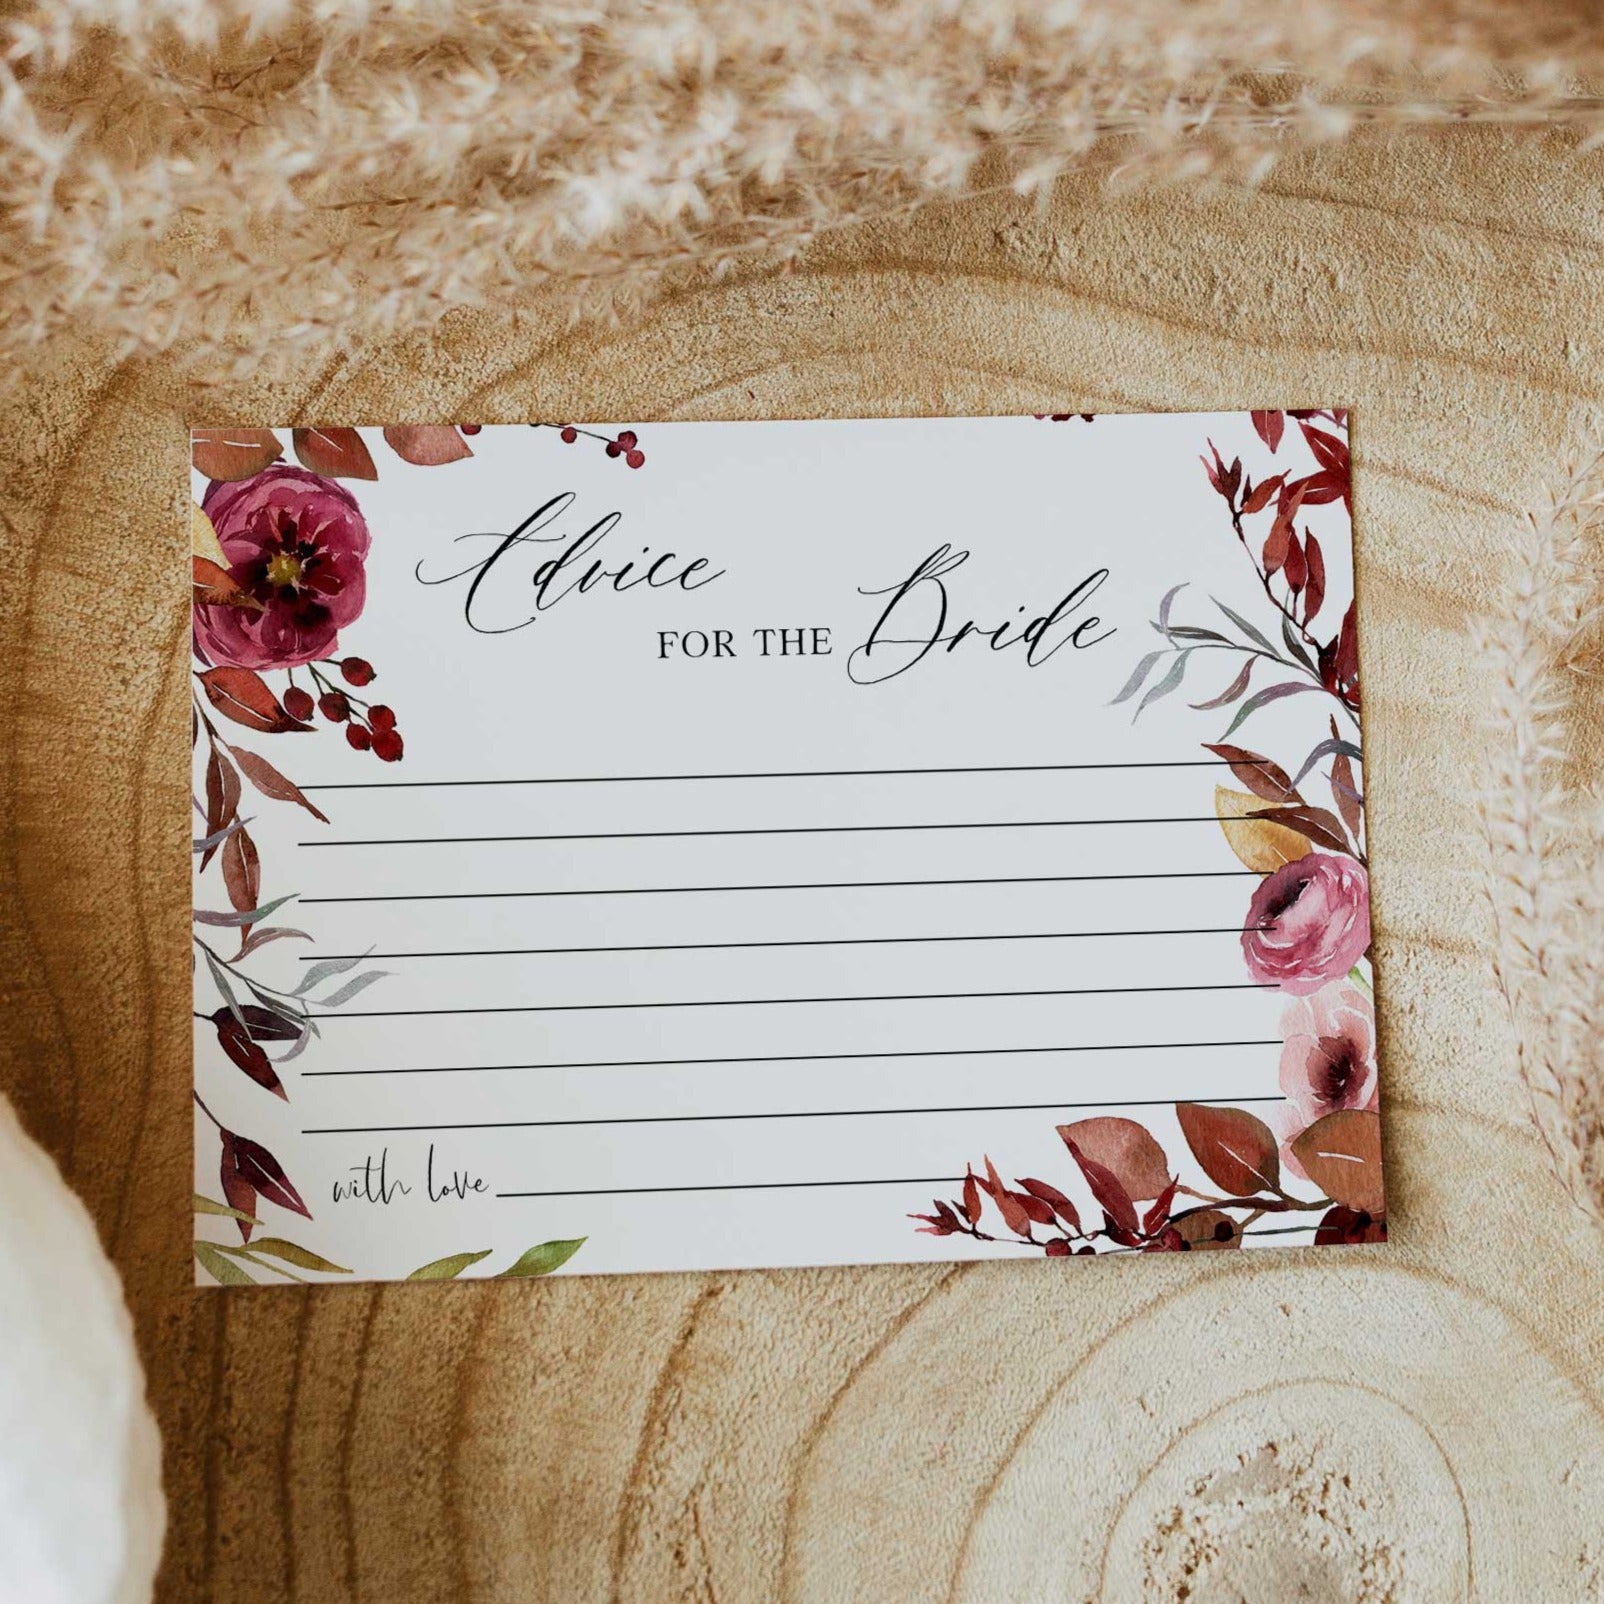 Fully editable and printable advice for the bride keepsake with a Fall design. Perfect for a fall floral bridal shower